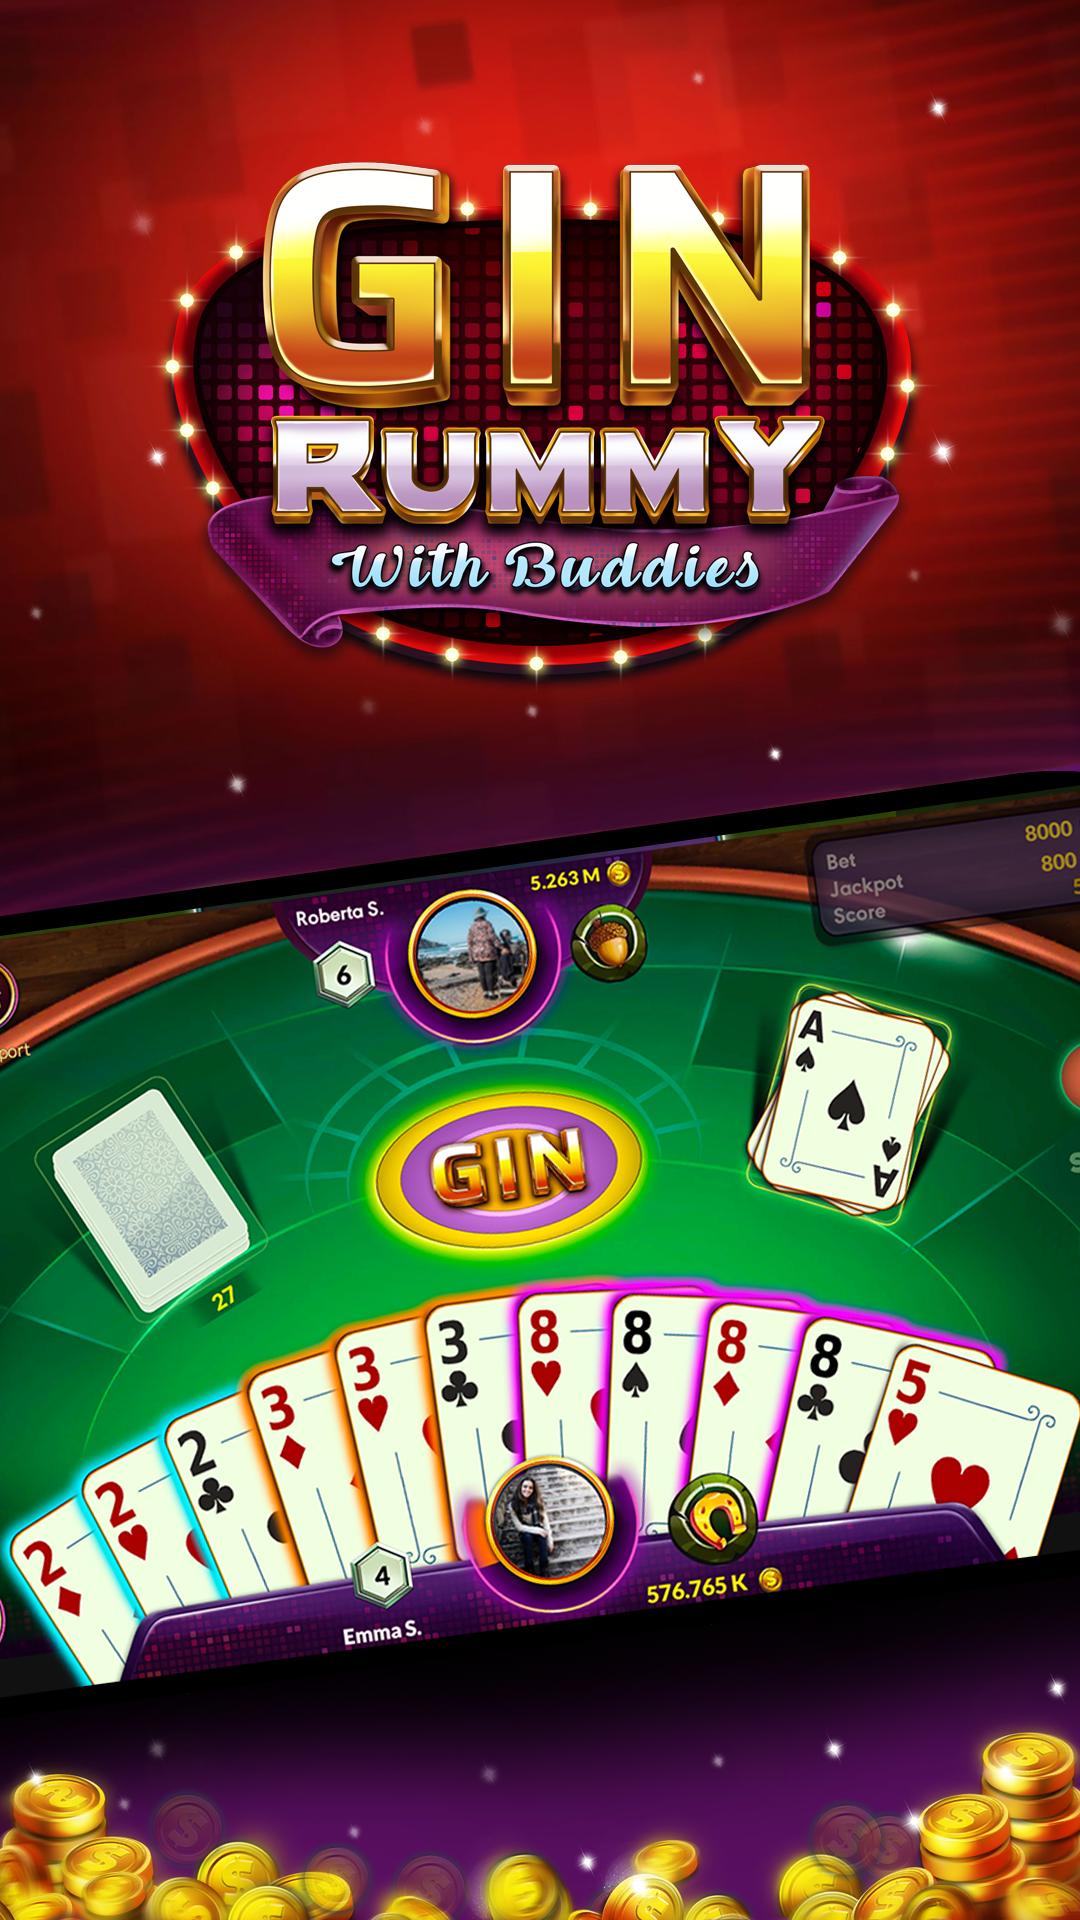 onhandig Nageslacht Behoefte aan Gin Rummy - Online Free Card Game for Android - APK Download